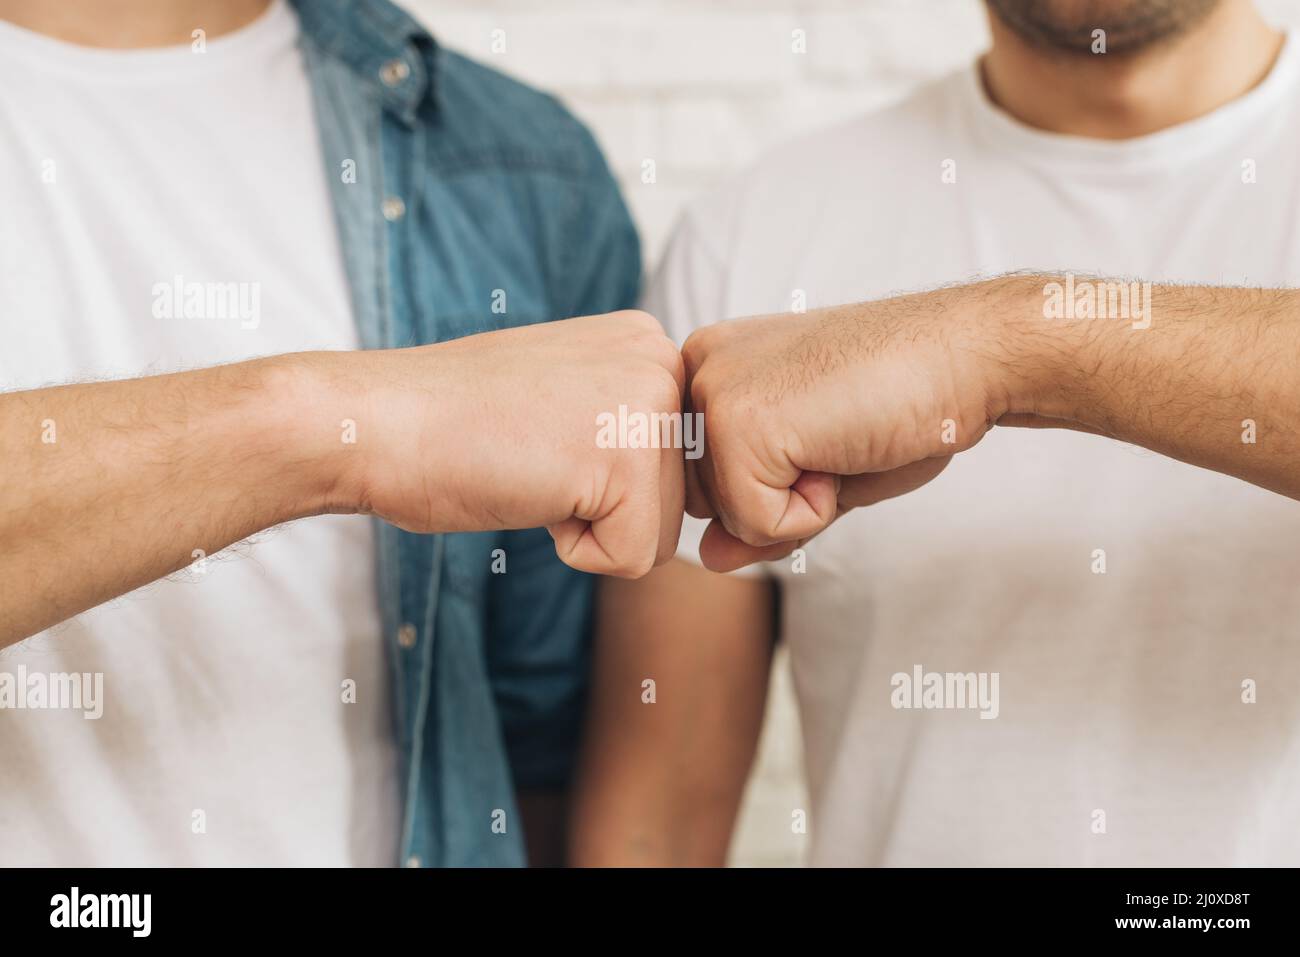 Close up male friend touching fist. High quality beautiful photo concept Stock Photo